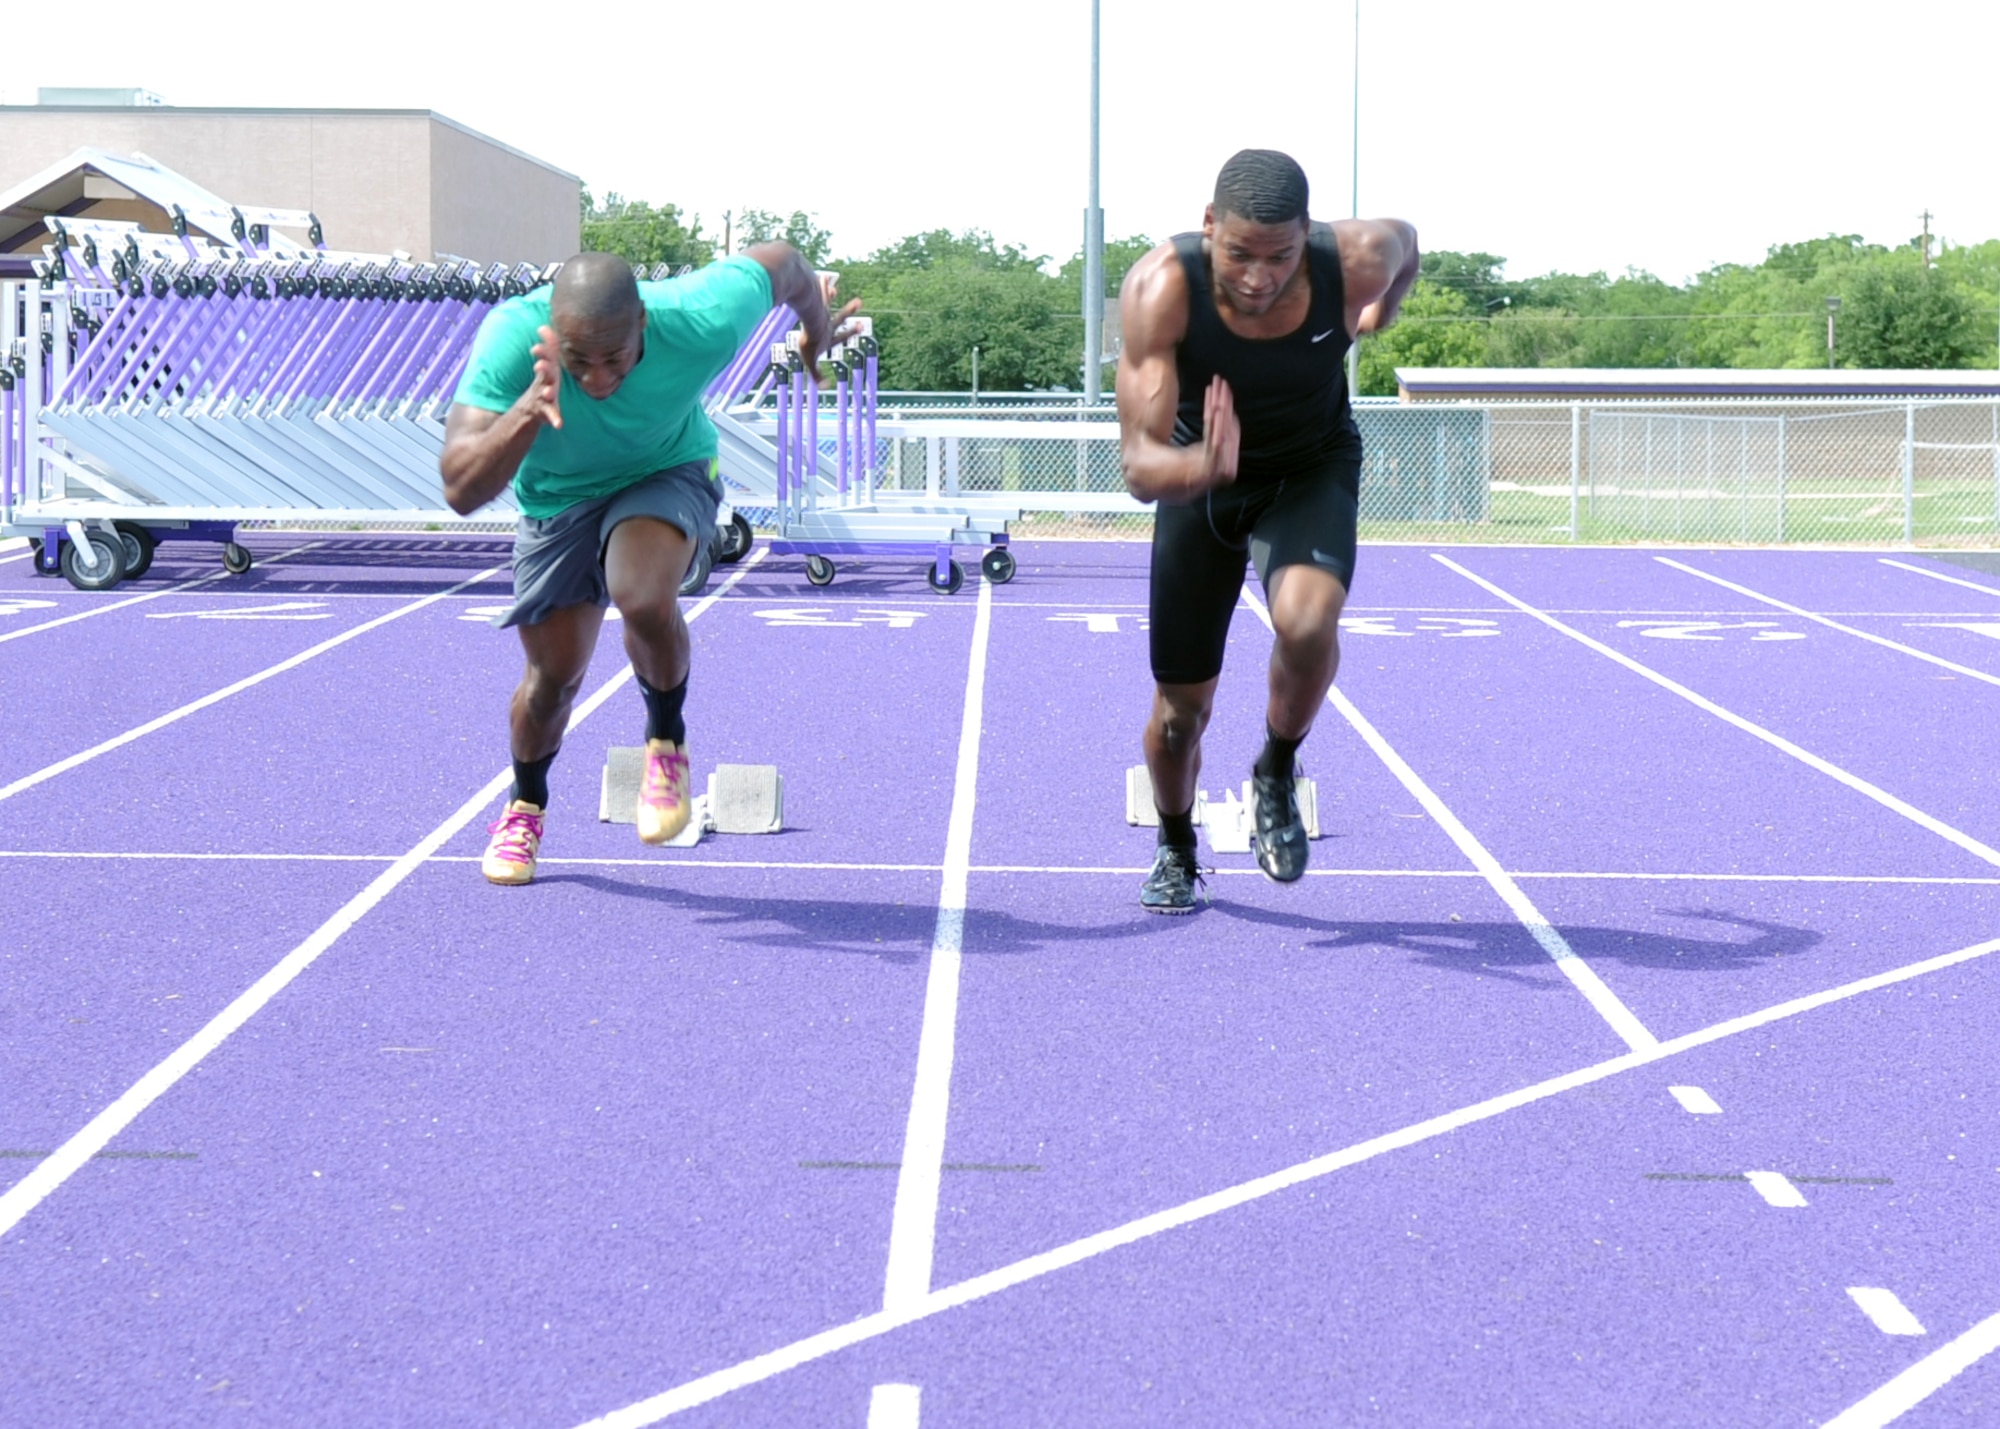 U.S. Air Force Senior Airmen Kwesi Toney, left, 7th Logistics Readiness Squadron equipment accountability clerk, and Parnelle Shands, 317th Aircraft Maintenance Squadron crew chief, practice coming out of starting blocks together at Abilene Christian University May 18, 2015, in Abilene, Texas. Both Airmen attended a training camp at Ramstein Air Base, Germany, for the U.S. Air Forces in Europe track and field team. (U.S. Air Force photo by Senior Airman Shannon Hall/Released)